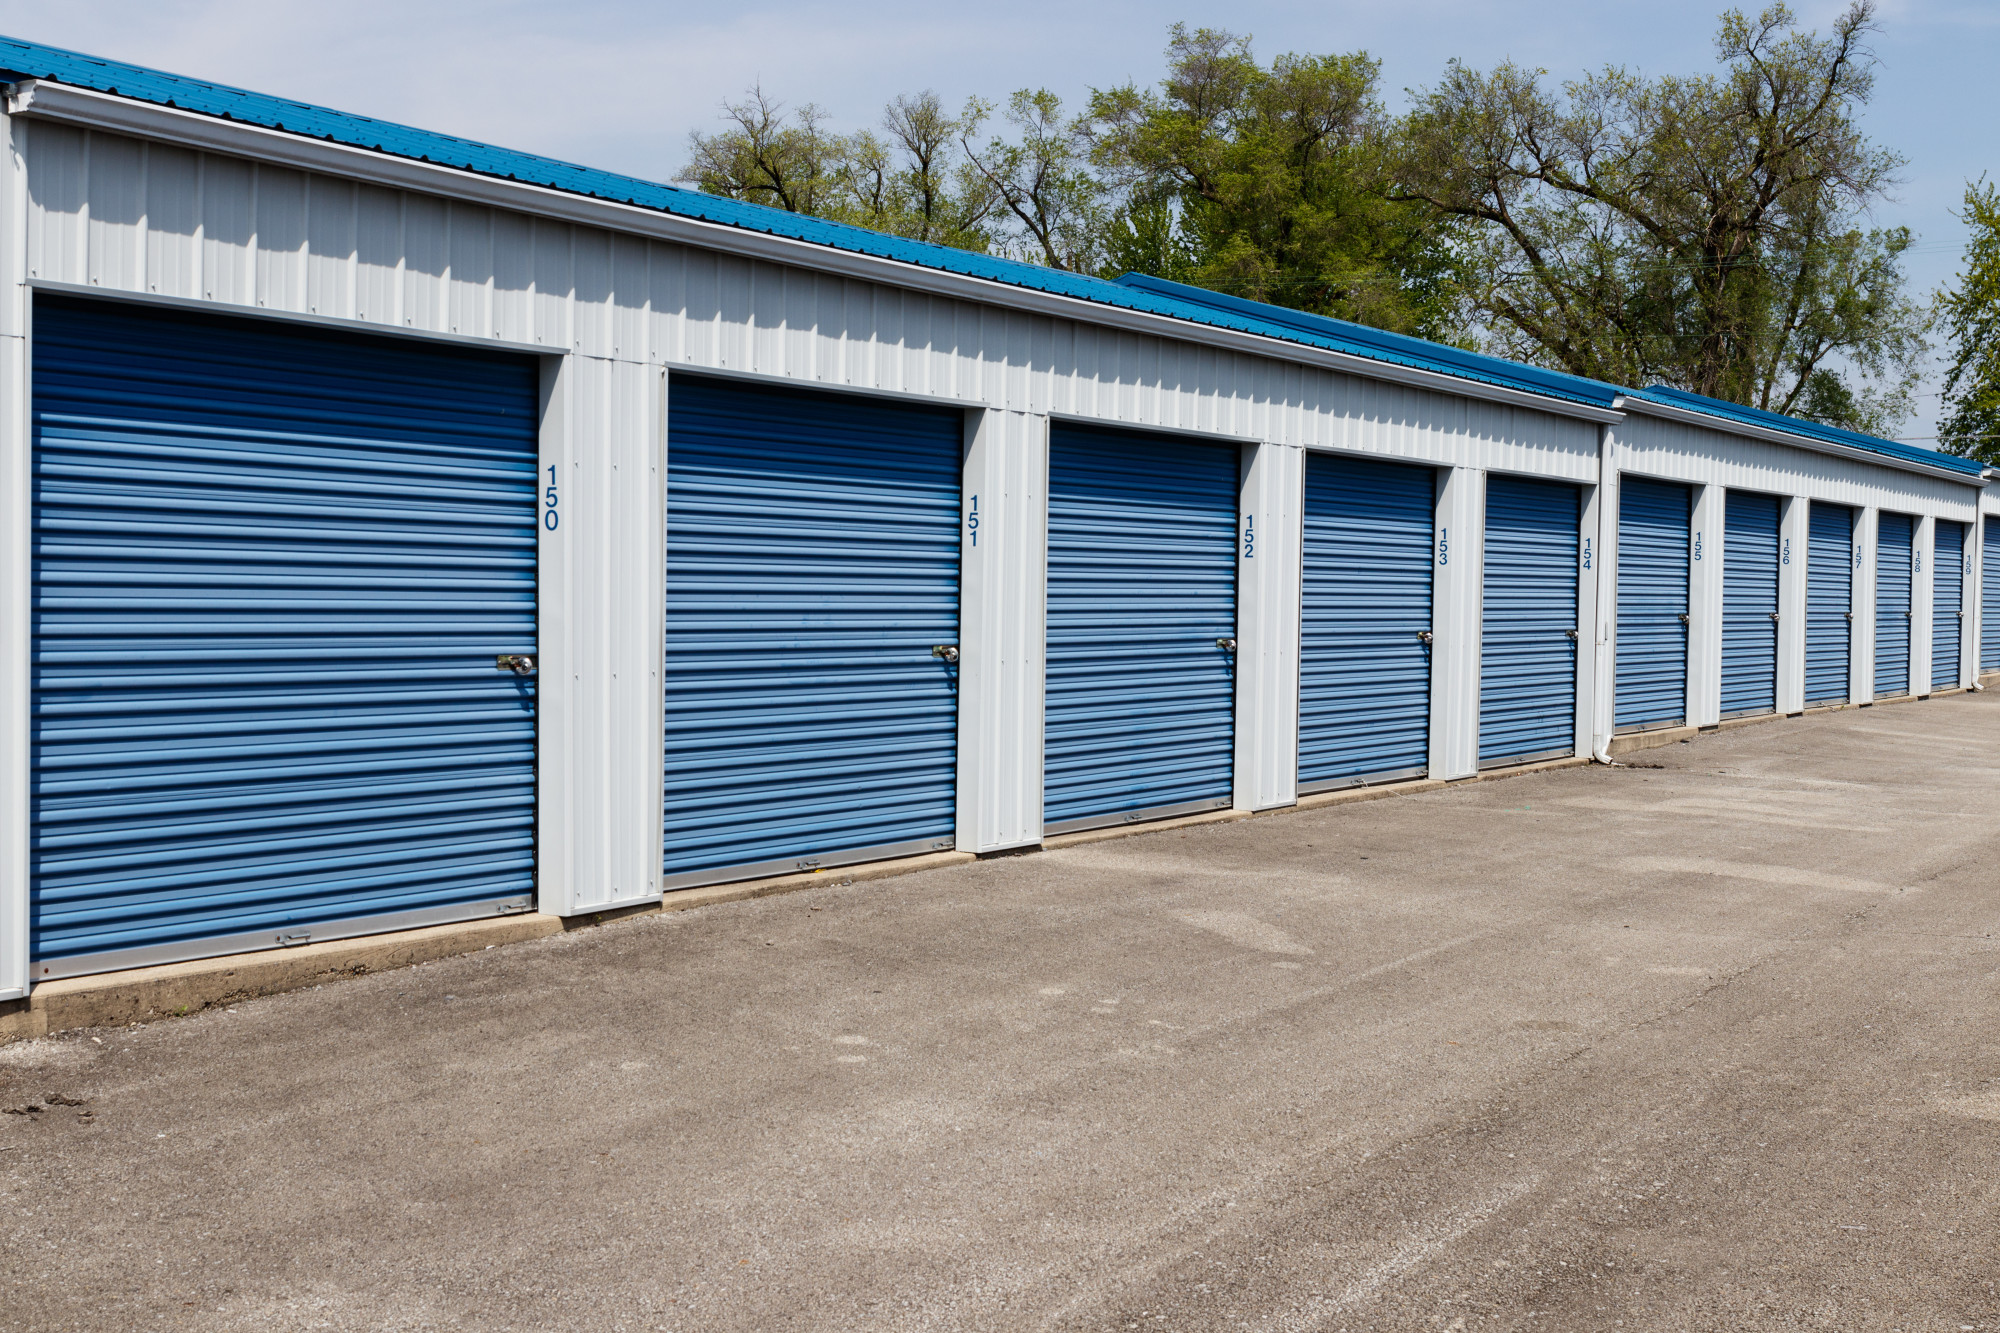 Storing personal items properly requires knowing what can hinder your progress. Here are common self-storage errors and how to avoid them.